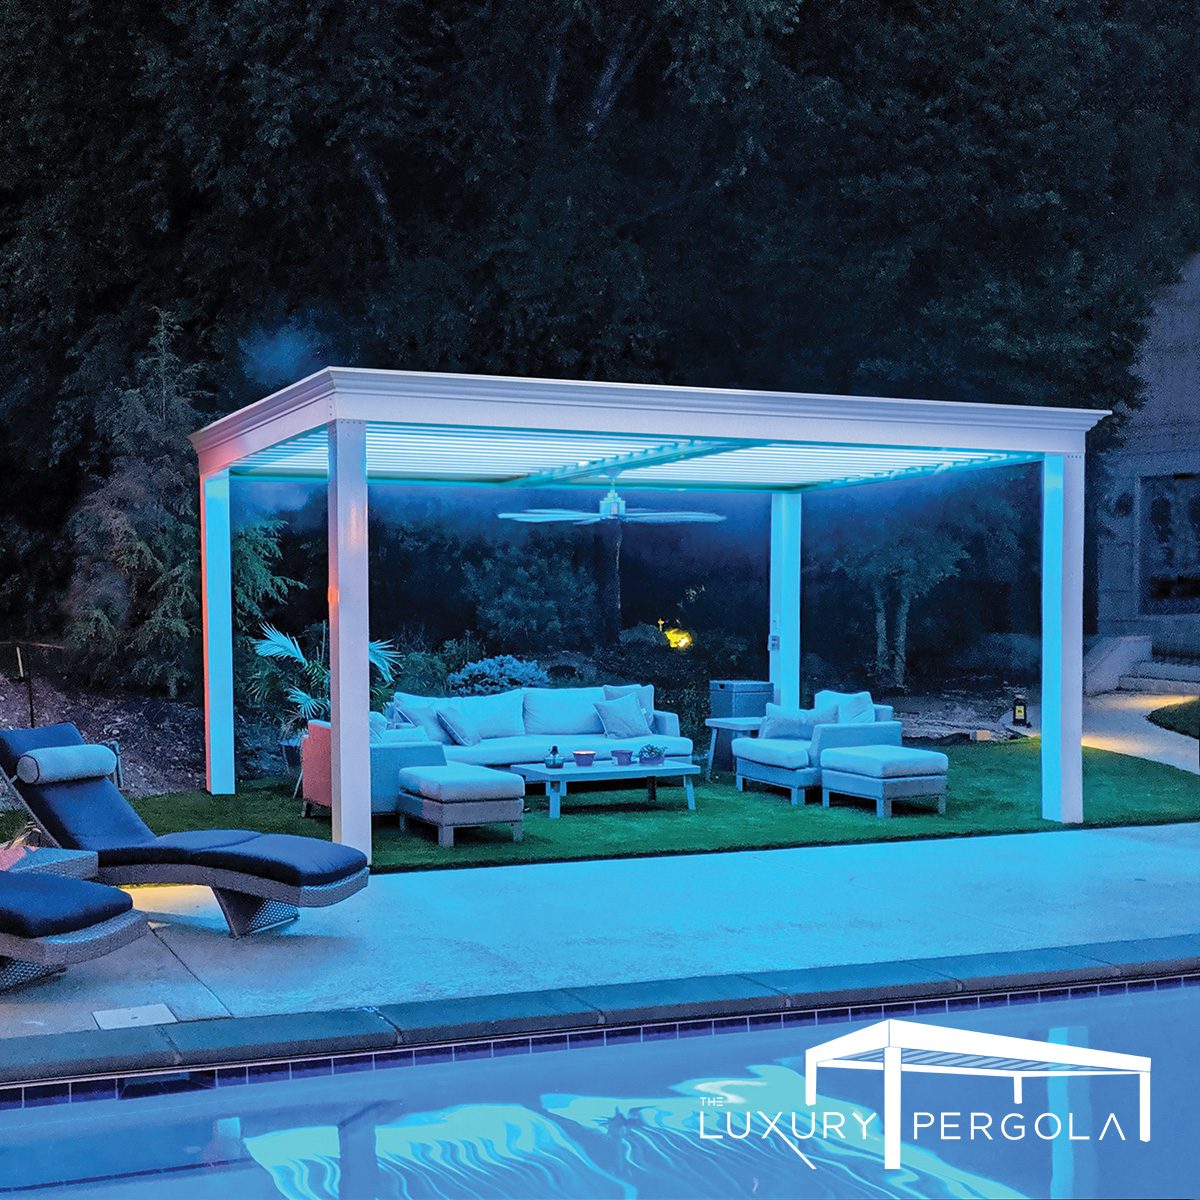 Luxury Pergola with High End Furniture